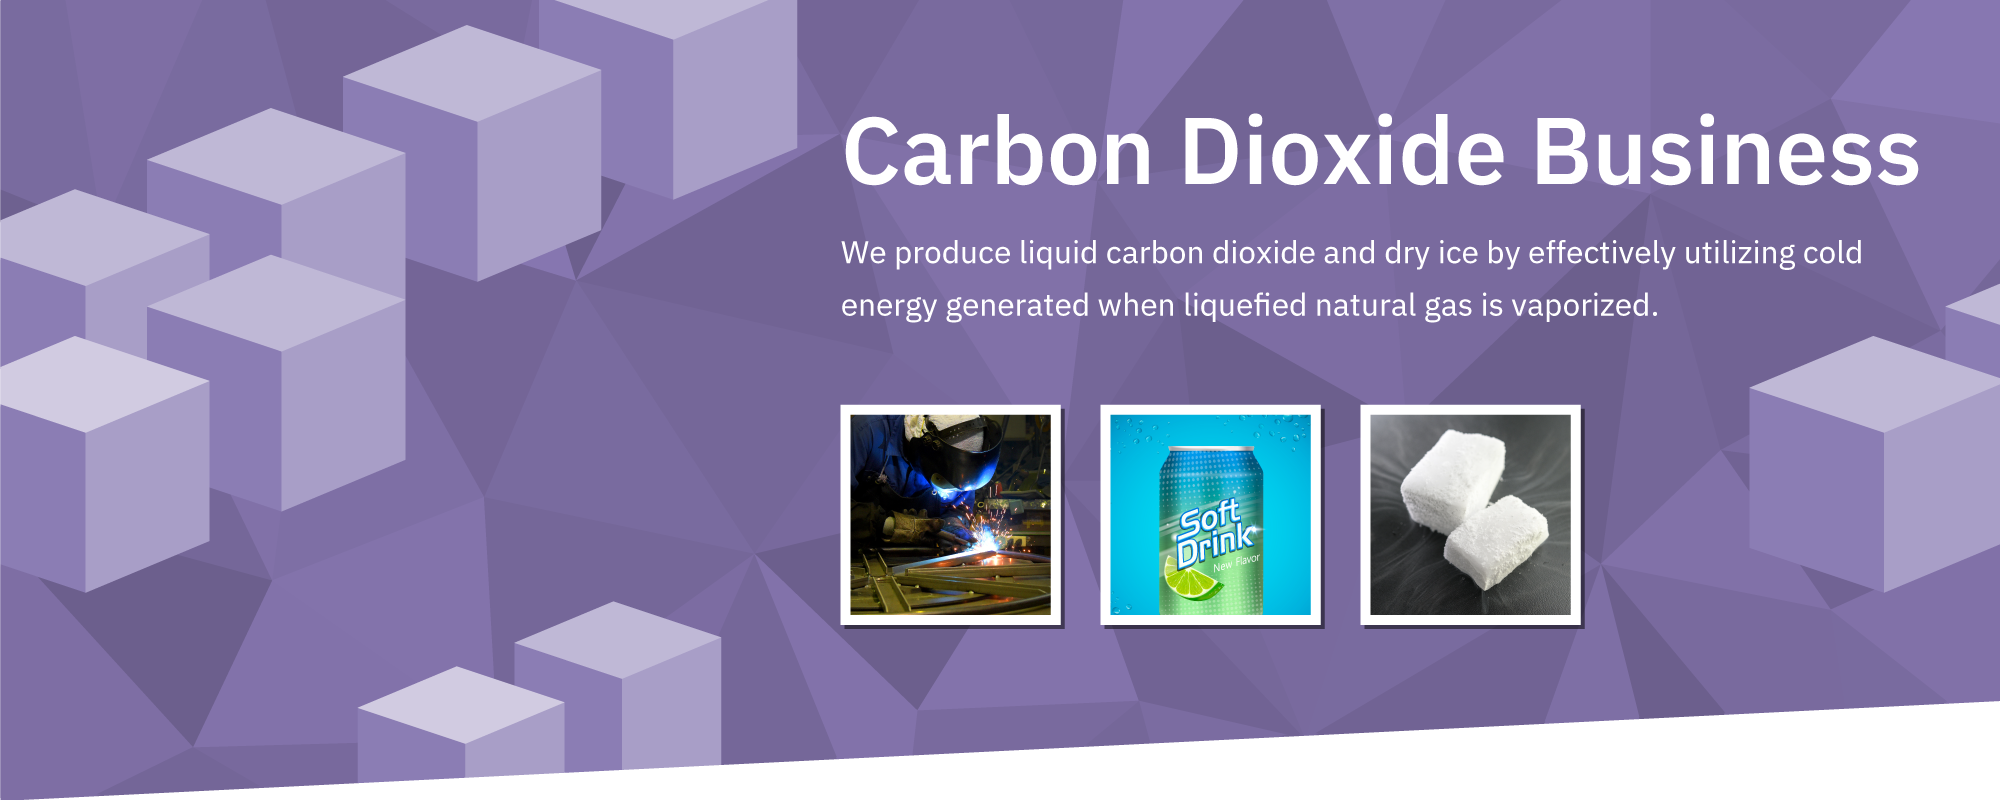 Carbon Dioxide Business: We produce liquid carbon dioxide and dry ice by effectively utilizing cold energy generated when liquefied natural gas is vaporized.